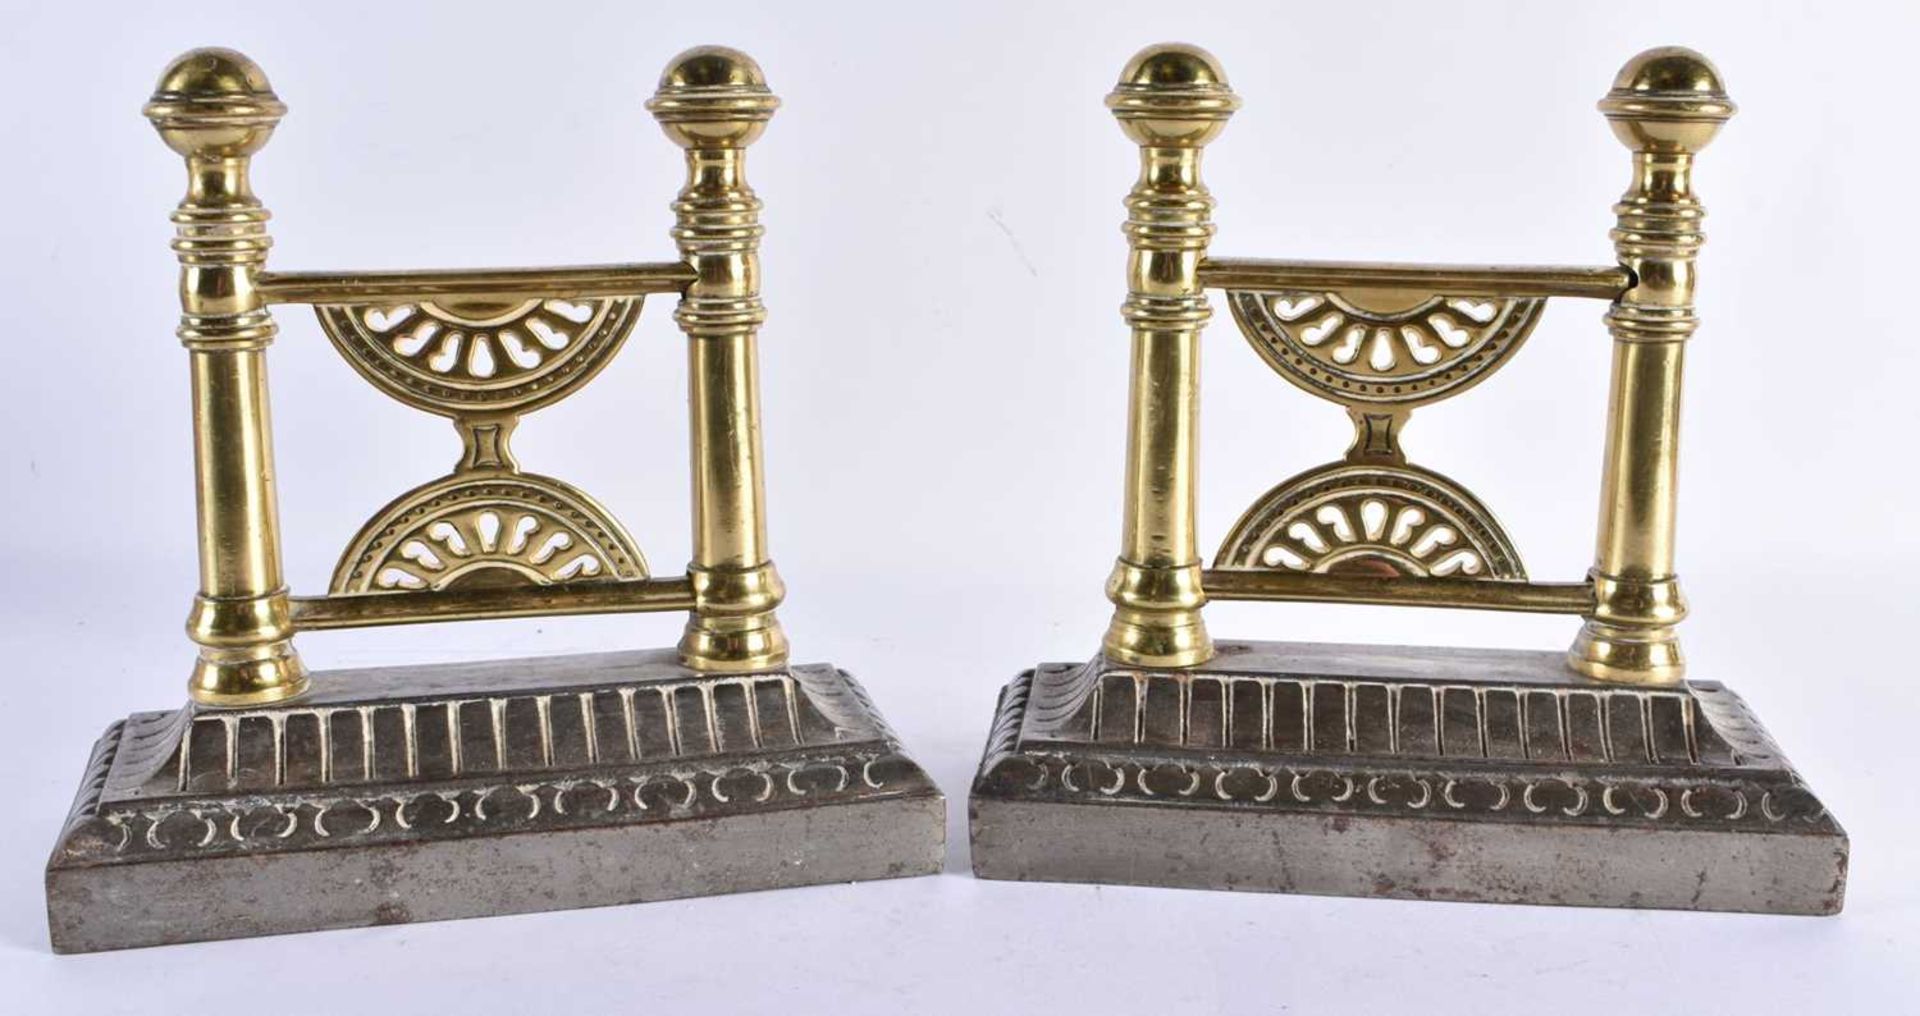 A LOVELY PAIR OF 19TH CENTURY ENGLISH AESTHETIC MOVEMENT BRONZE AND STEEL FIRESIDE DOGS Attributed